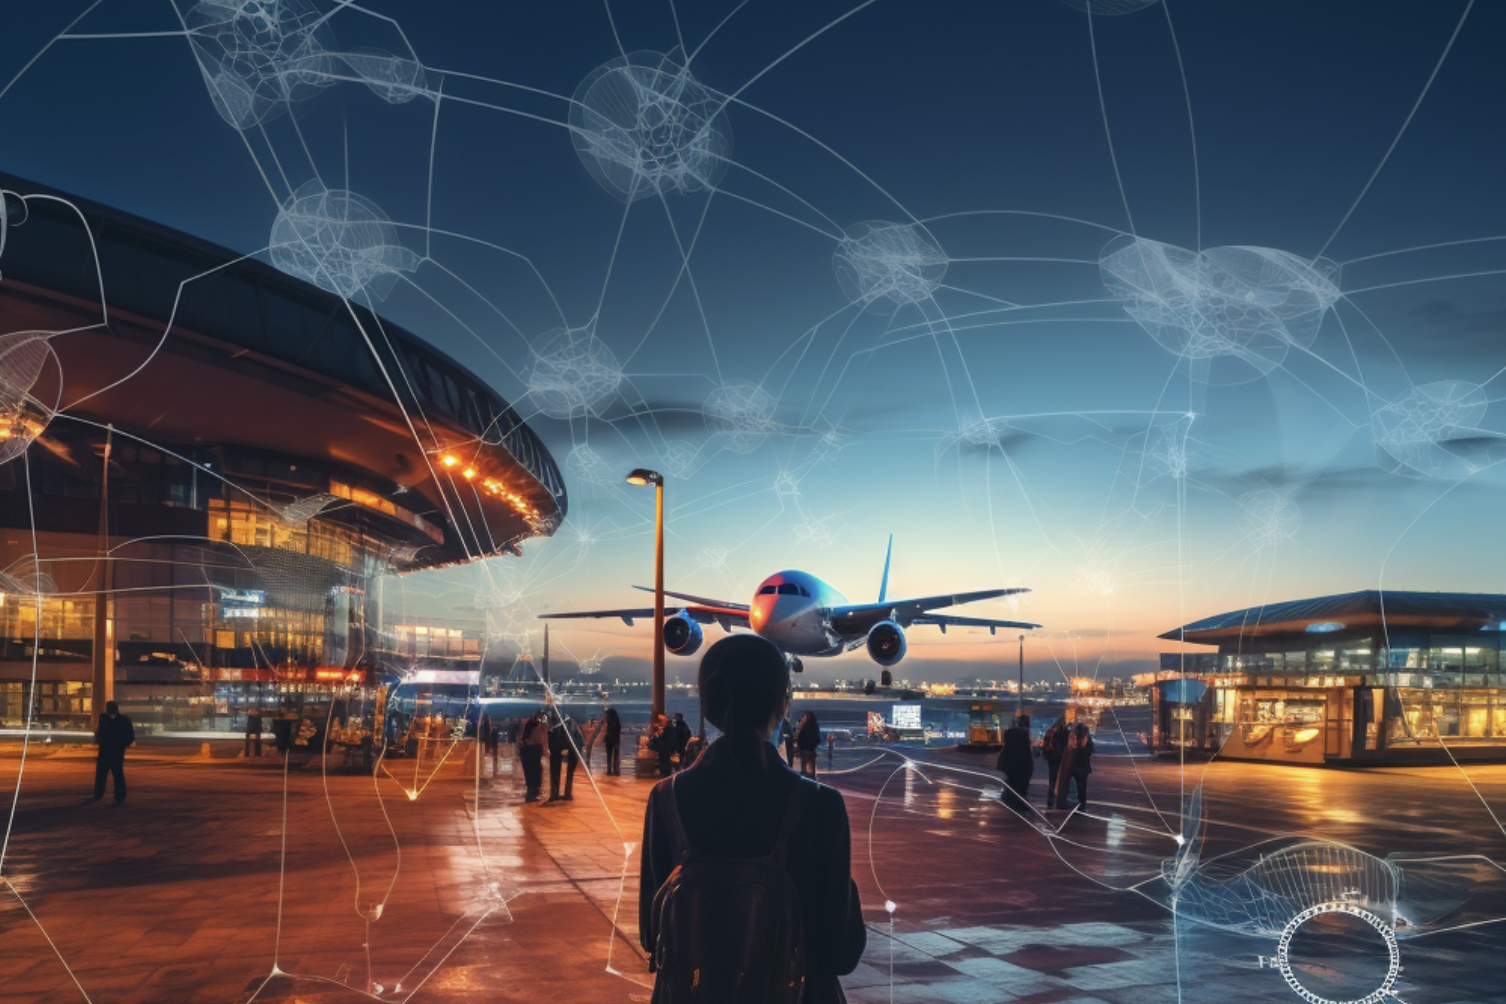 Benefits of Employing Artificial Intelligence in Airlines